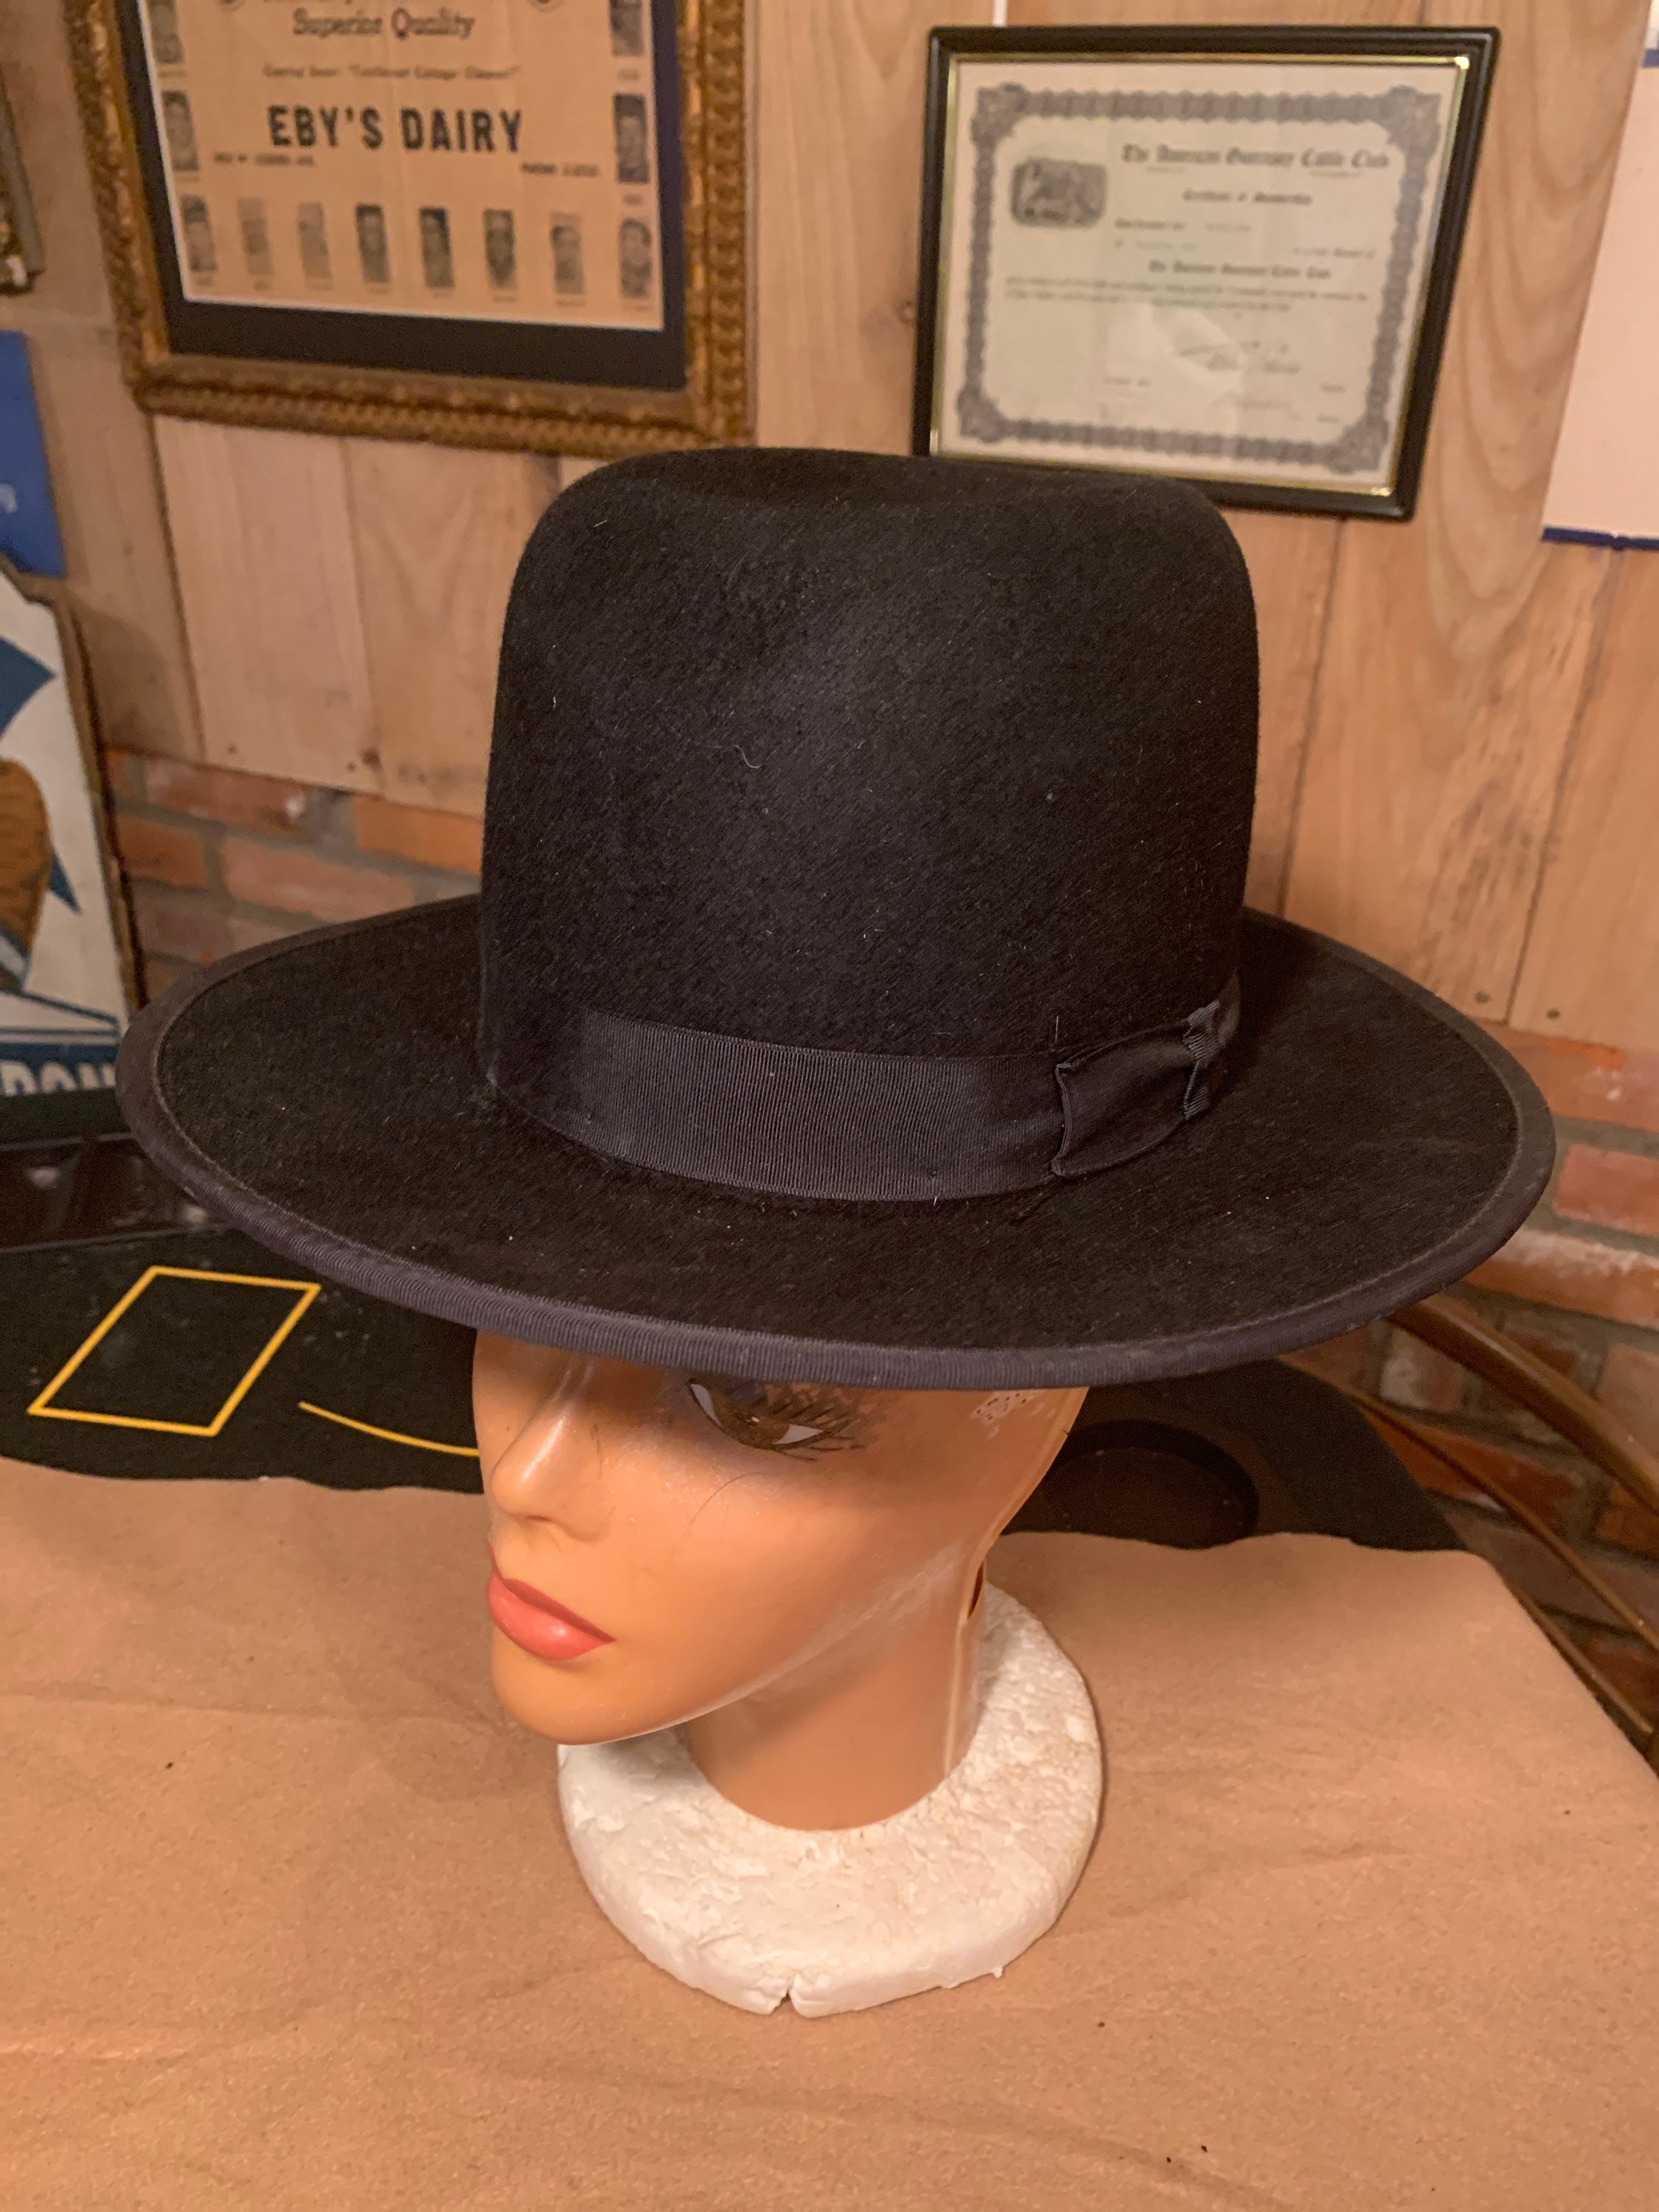 Vintage Felt Amish Dress Hat From Flying Cloud Hats Size 6 5/8